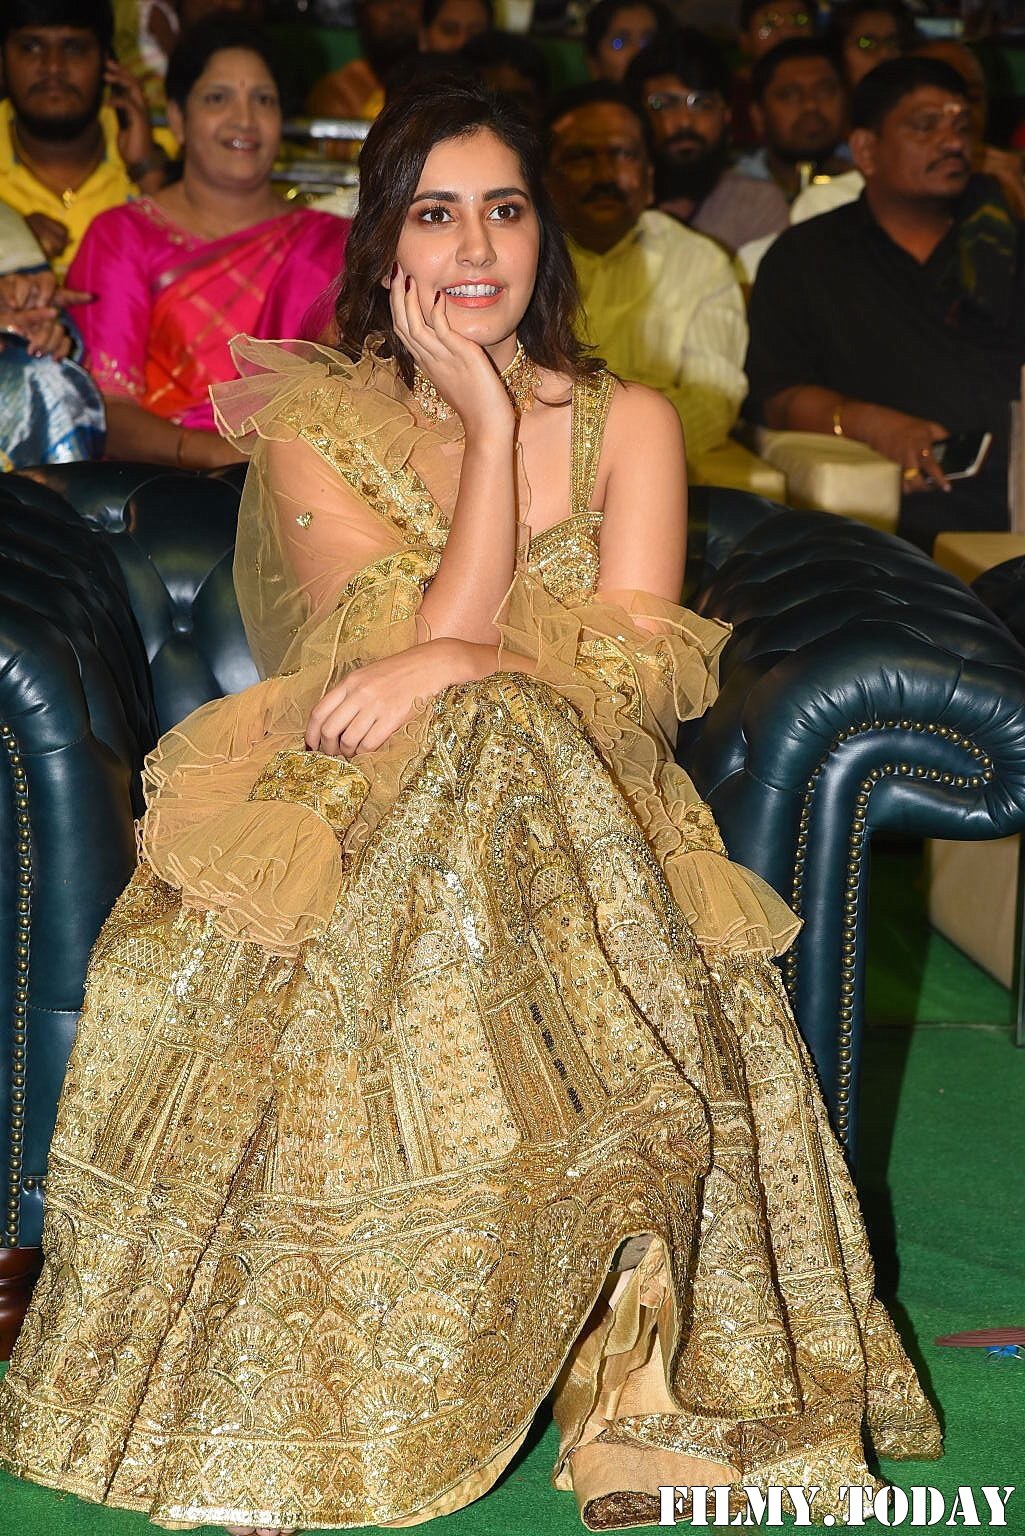 Raashi Khanna - Venky Mama Movie Pre Release Event At Khammam Photos | Picture 1705652